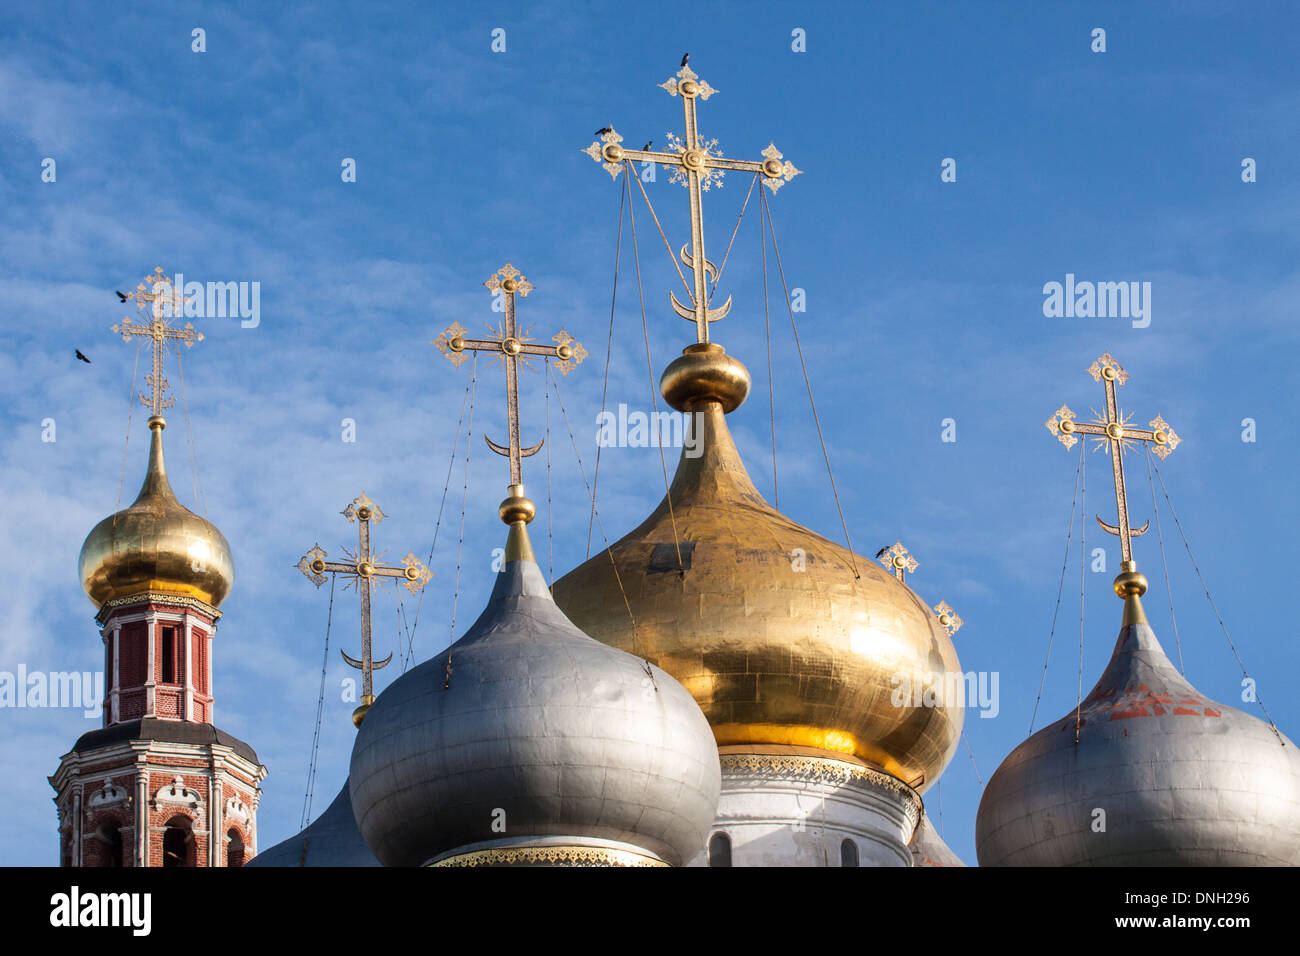 DOMES OF OUR LADY OF SMOLENSK WITH THE BELL TOWER IN THE BACKGROUND, NOVODIEVITCHI CONVENT, BOGORODITSE-SMOLENSKY MONASTERY, ORTHODOX RELIGION, MOSCOW, RUSSIA Stock Photo